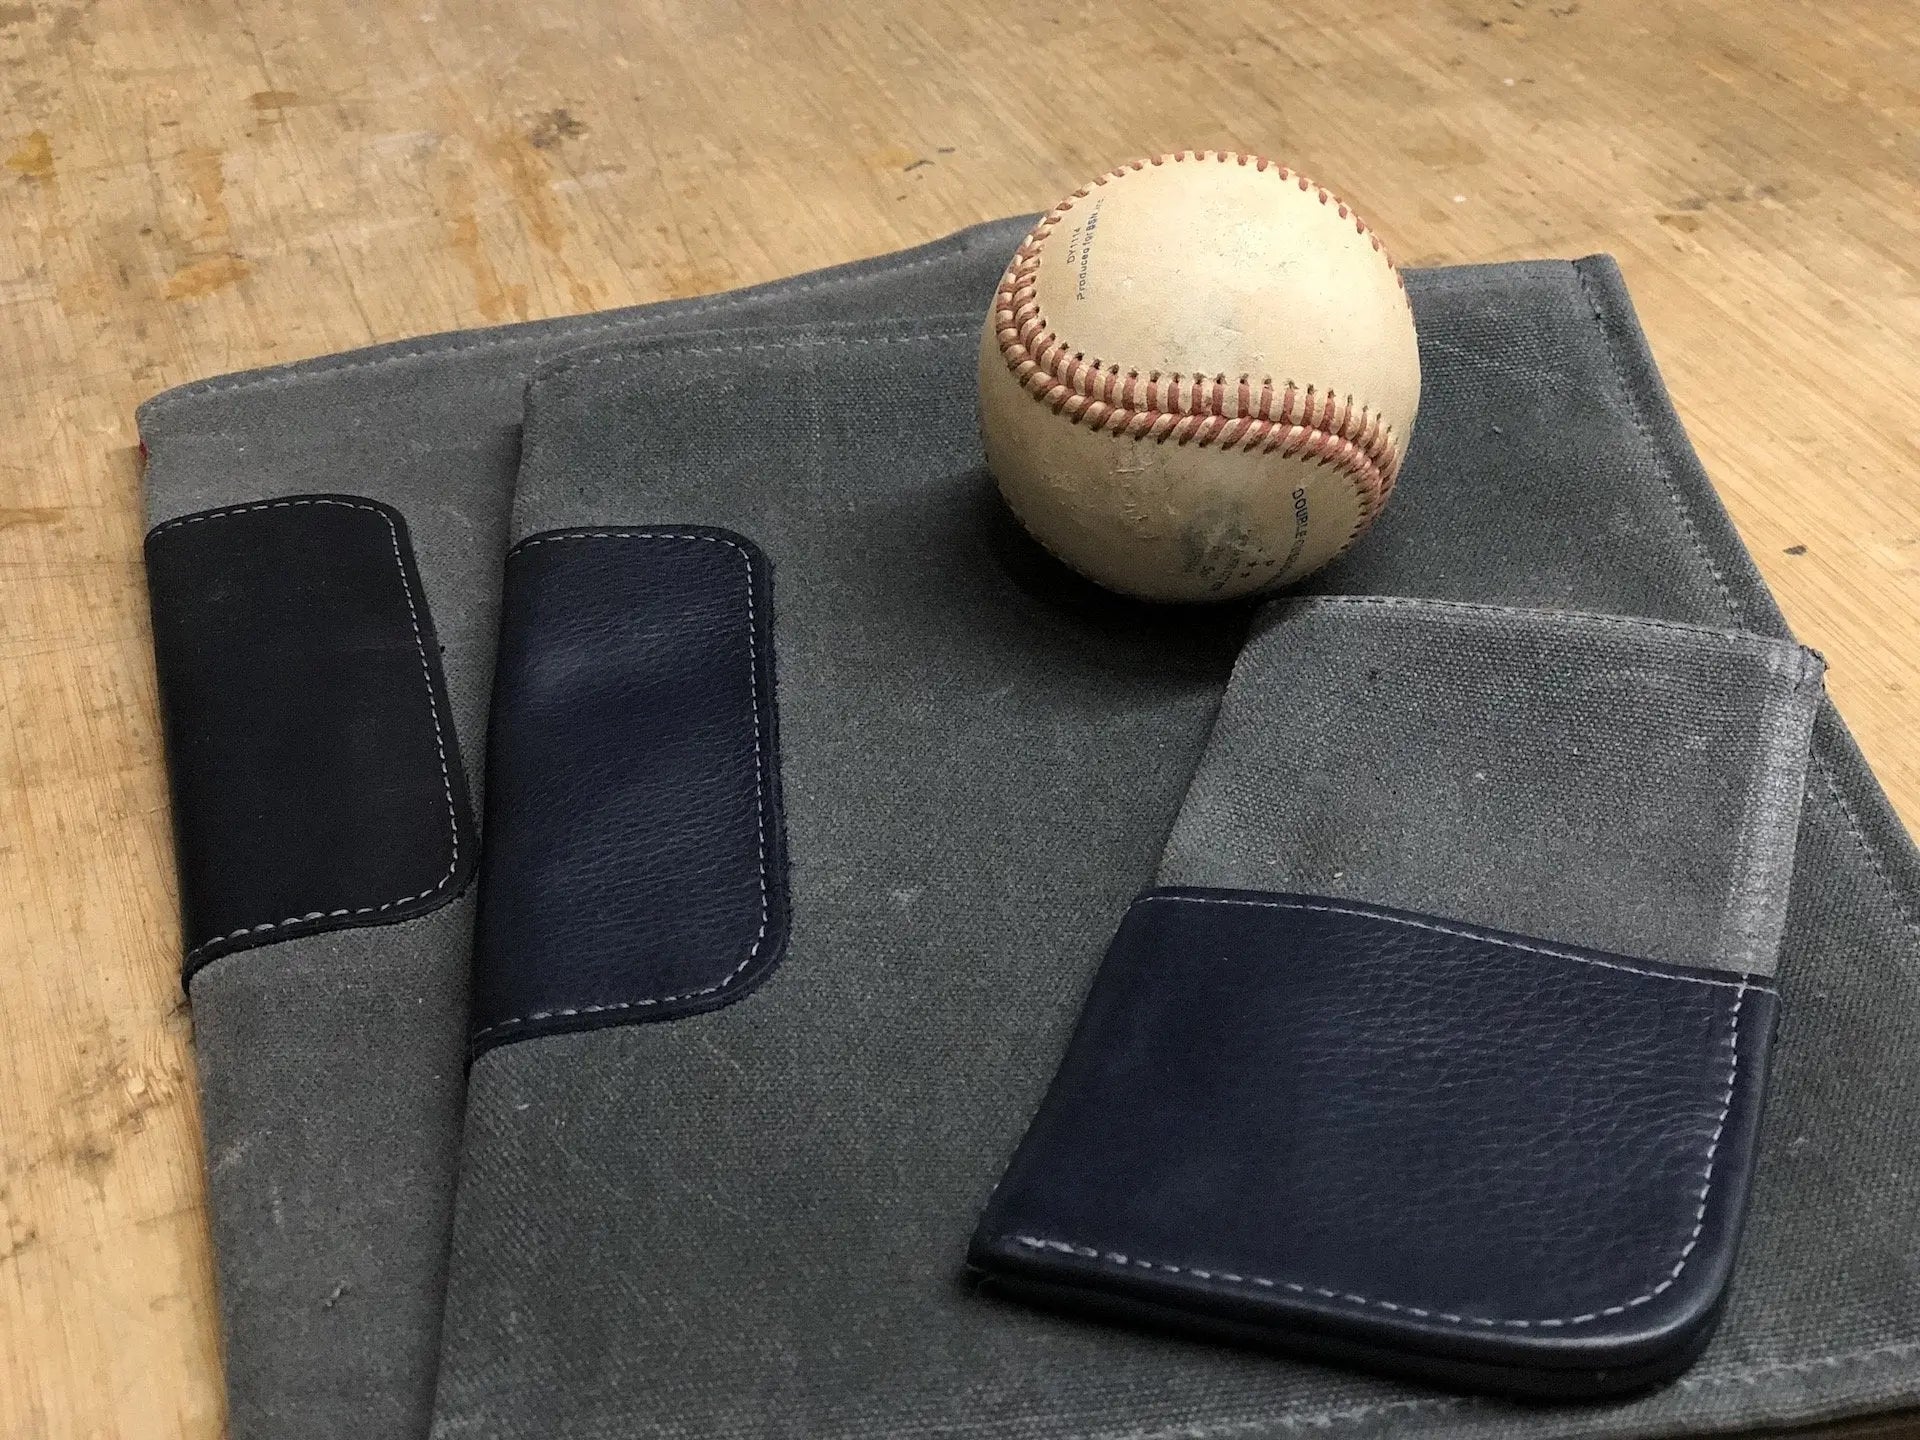 Waxed Canvas Durable Sleeves for iPads, Macbooks, & iPhones DODOcase, Inc.